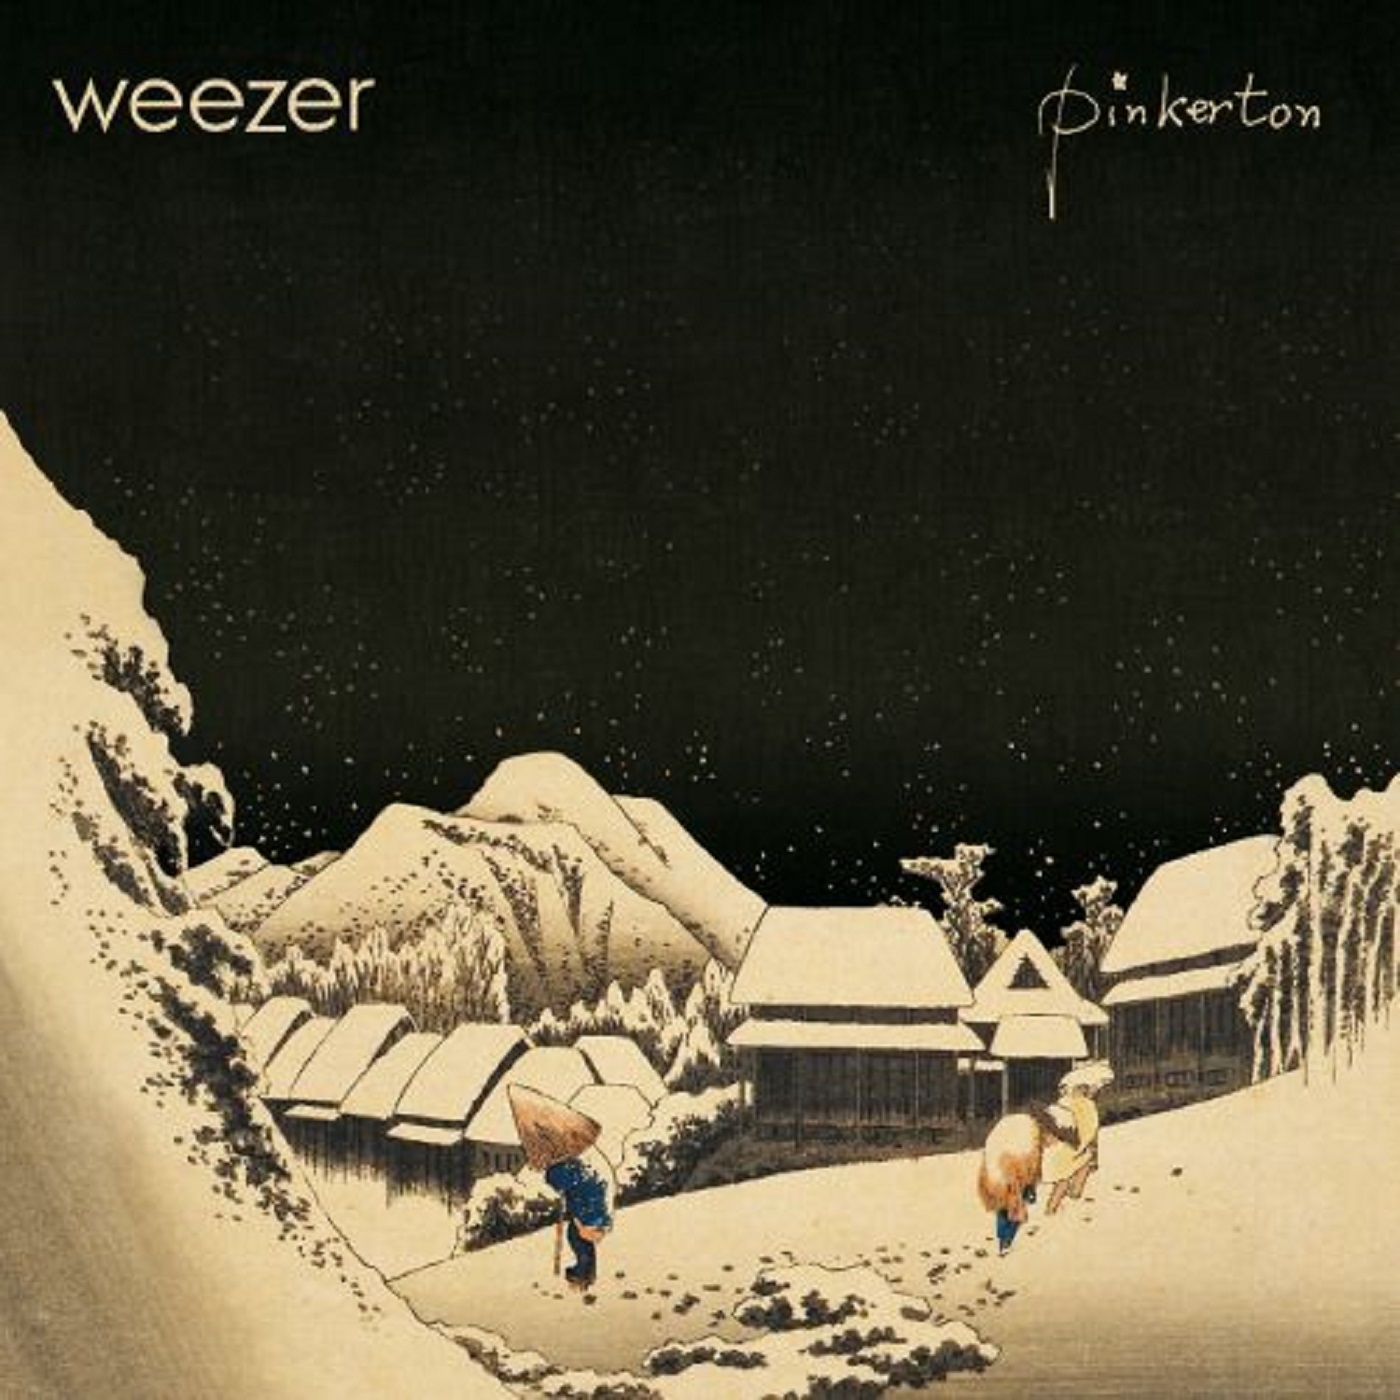 Weezer's “Pinkerton” (with Katy Johnson and Will Hayden)